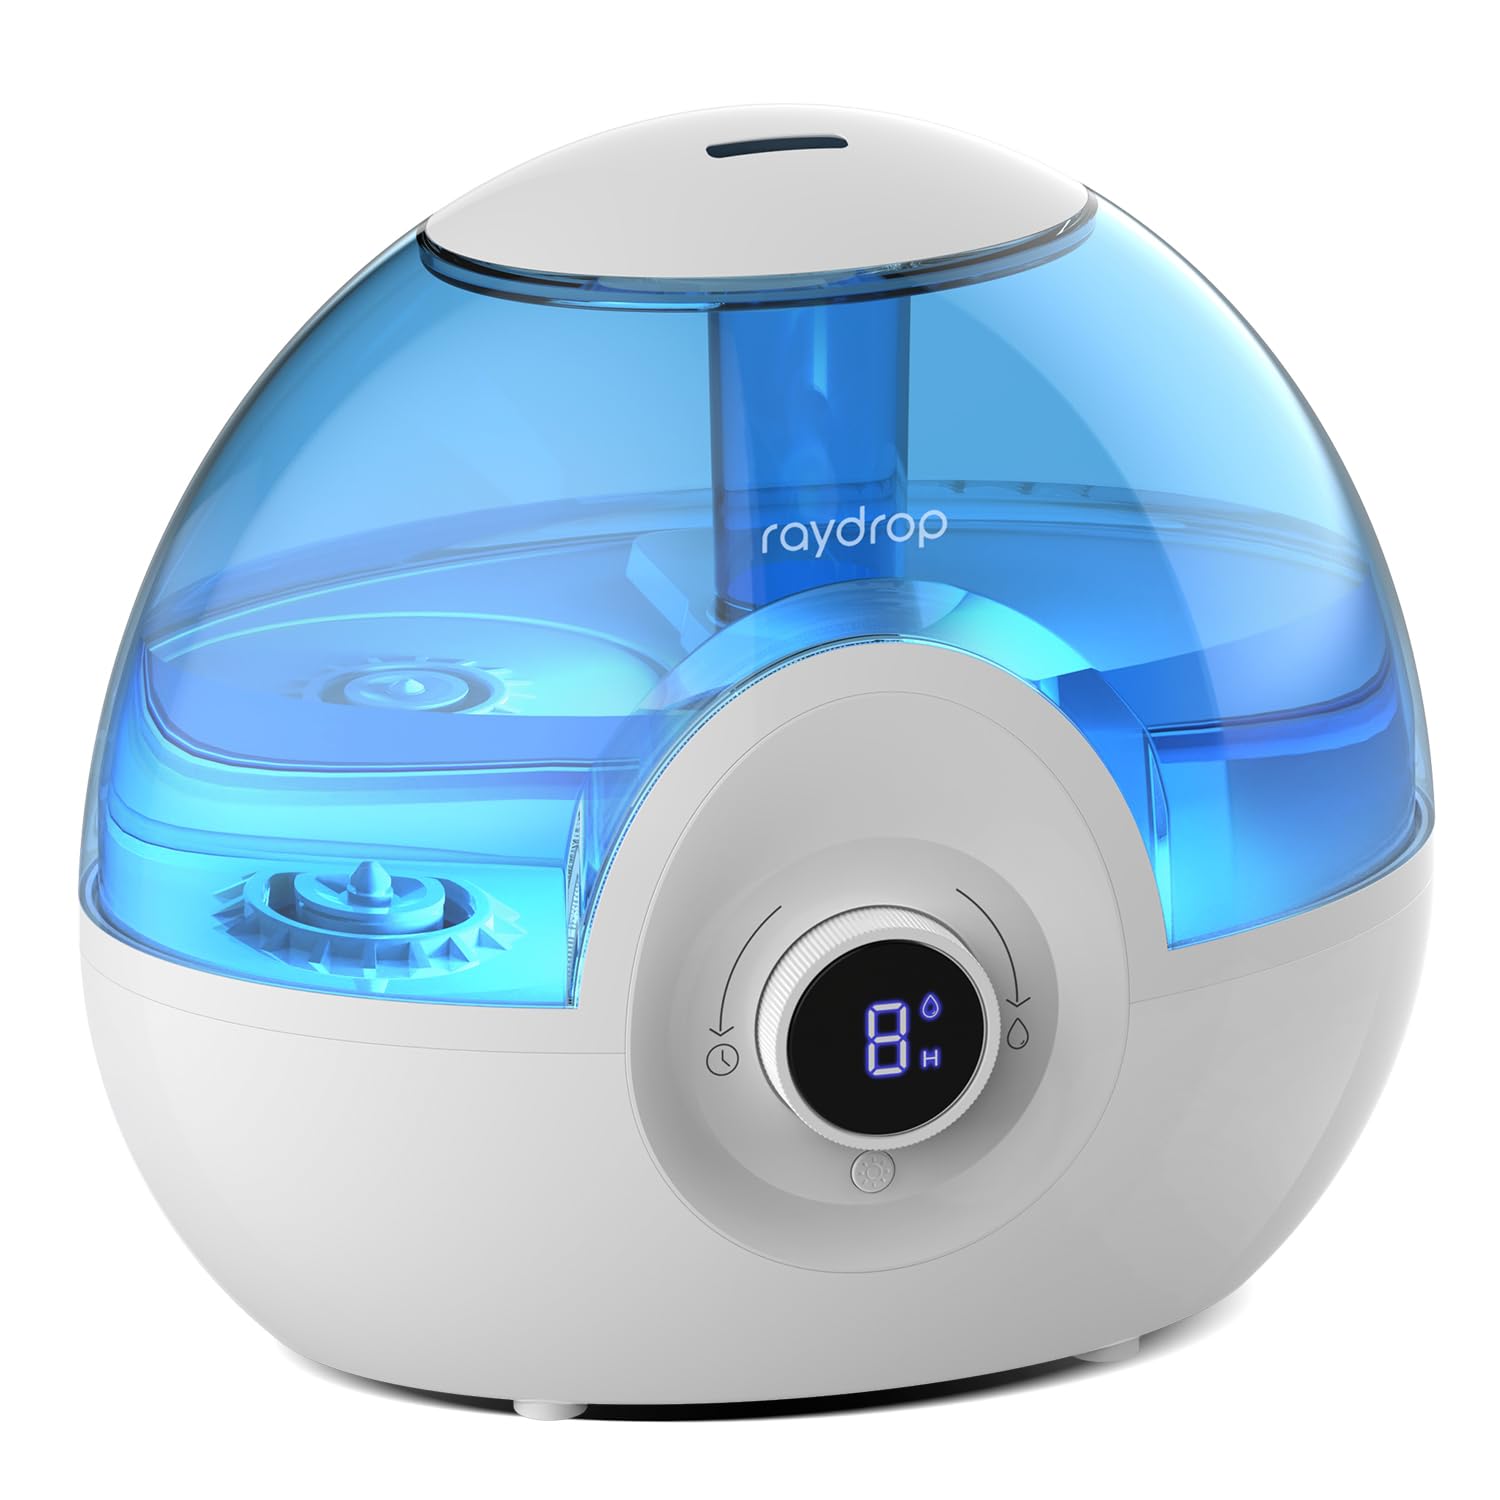 2.2l raydrop Ultrasonic Cool Mist Humidifier for Bedrooms $14.87 @ Amazon